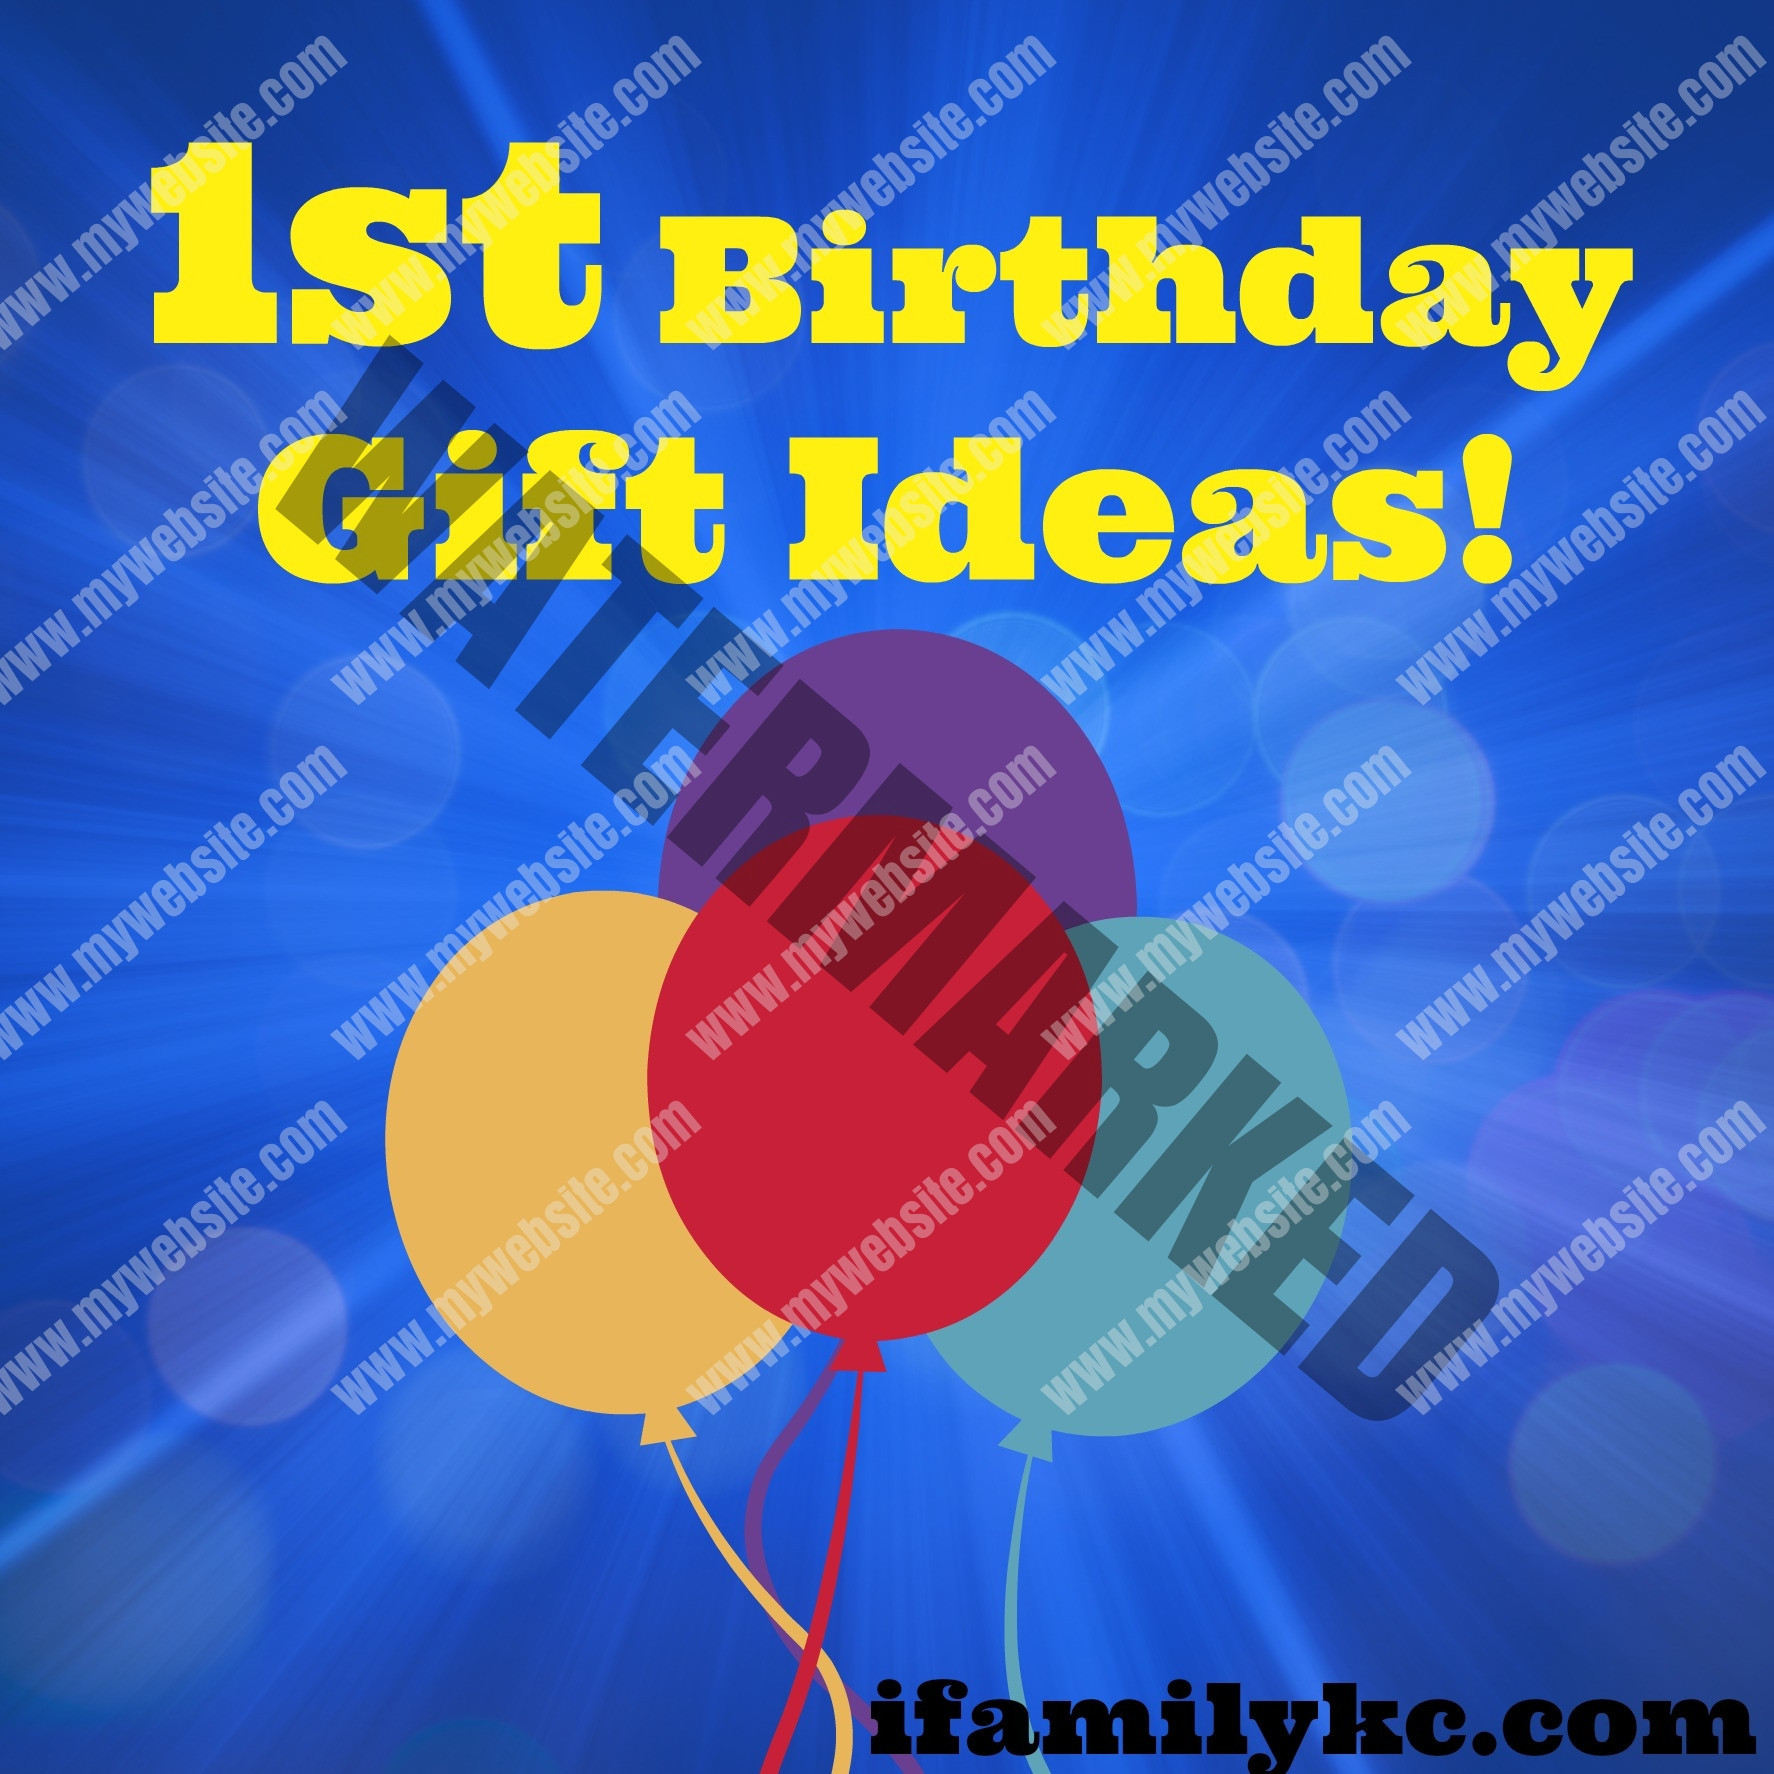 First Birthday Gift Ideas From Parents
 The 20 Best Ideas for First Birthday Gift Ideas From